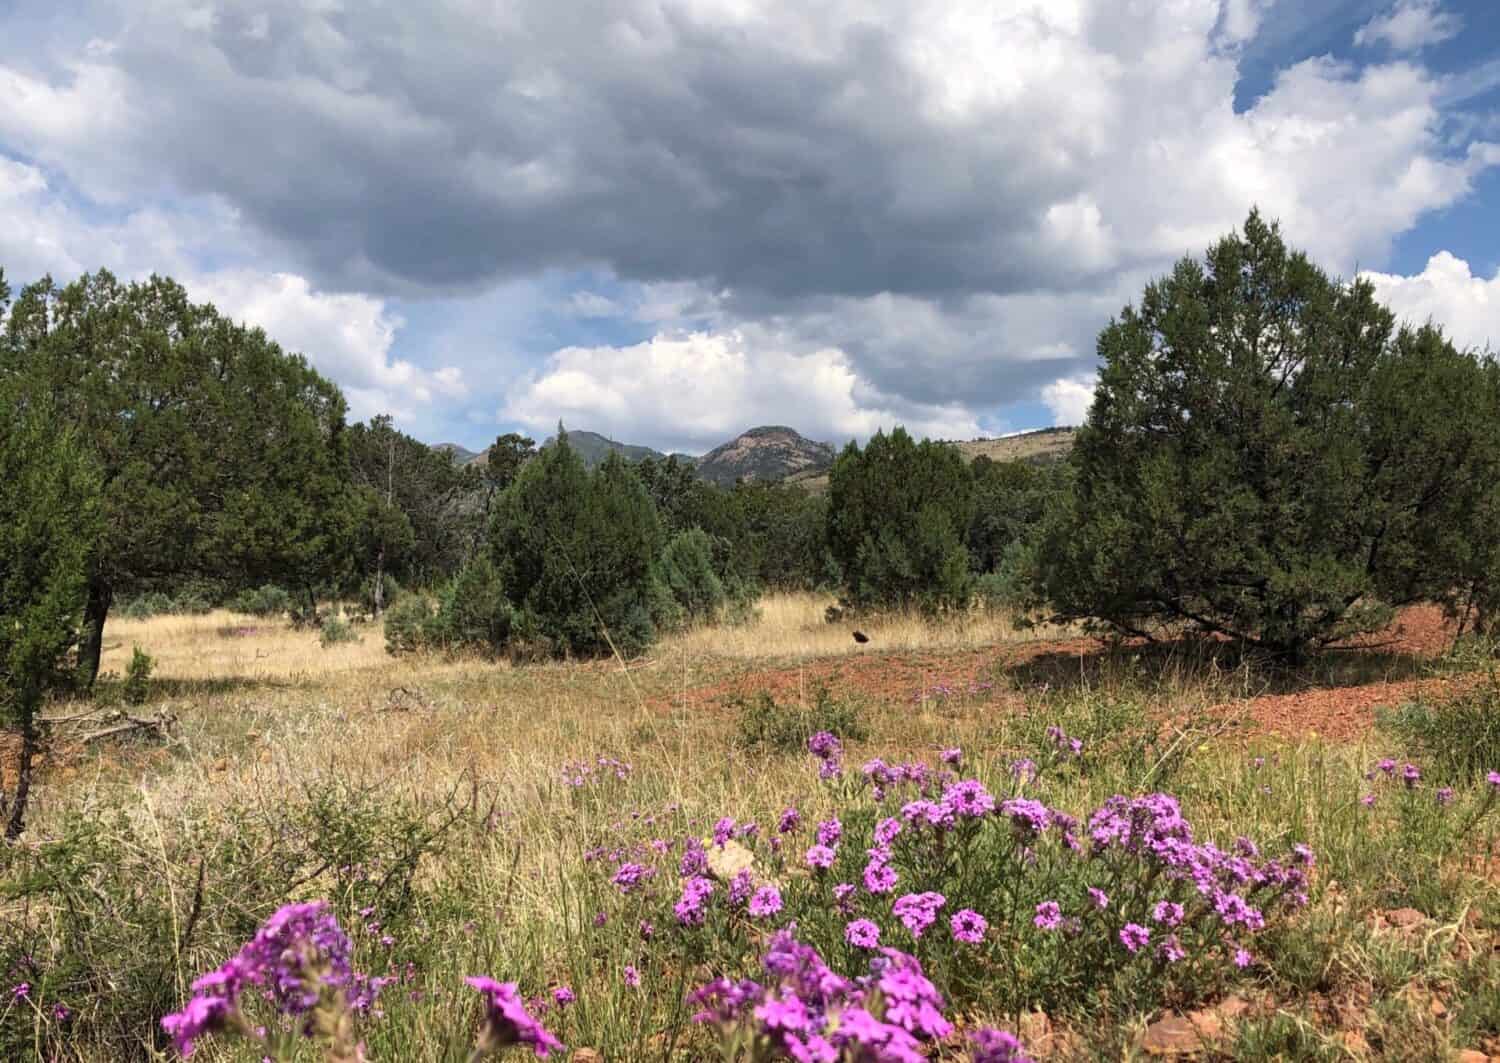 Bright pink flowers in the foreground in the midst ofgrasses and junipers. The Black Range Mountains and big fluffy clouds in the background.